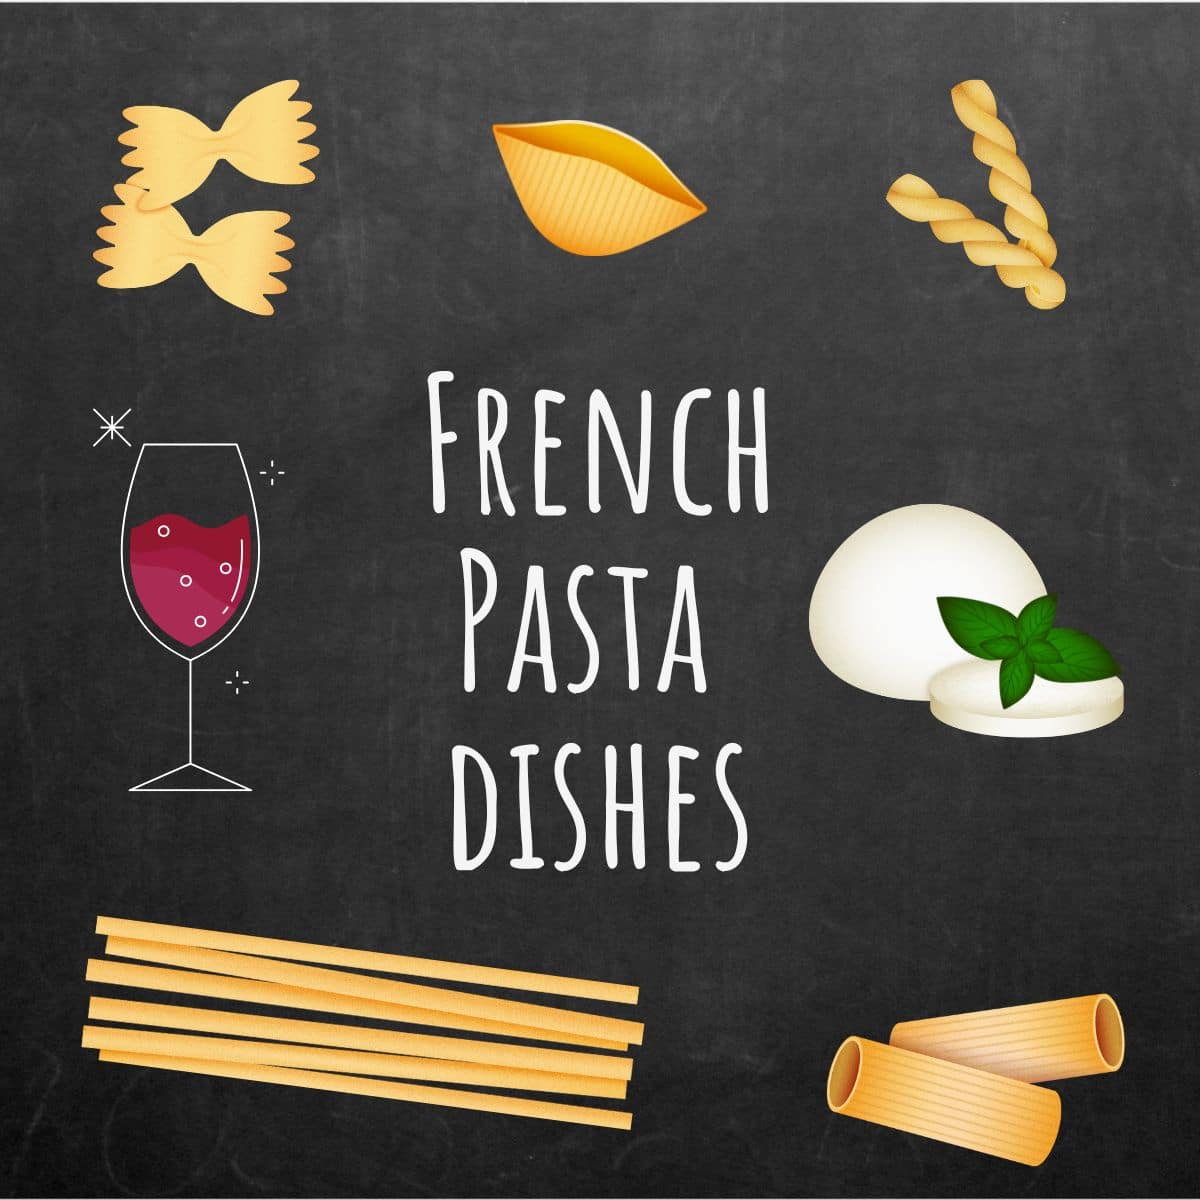 You are currently viewing 7 Delicious French pasta dishes